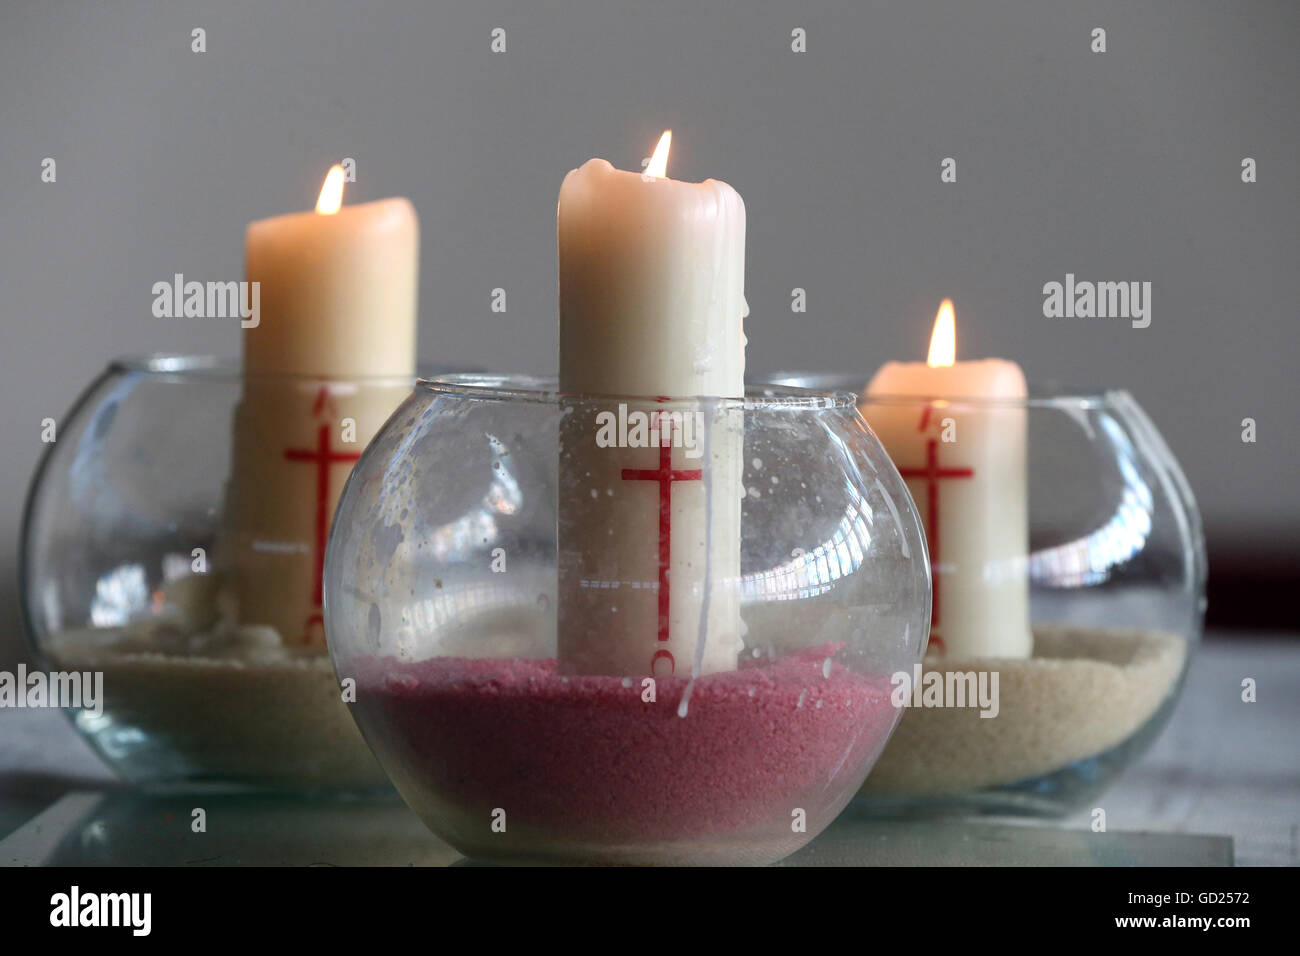 Three church candles in sand, Bussy-Saint-Georges, Seine-et-Marne, France, Europe Stock Photo